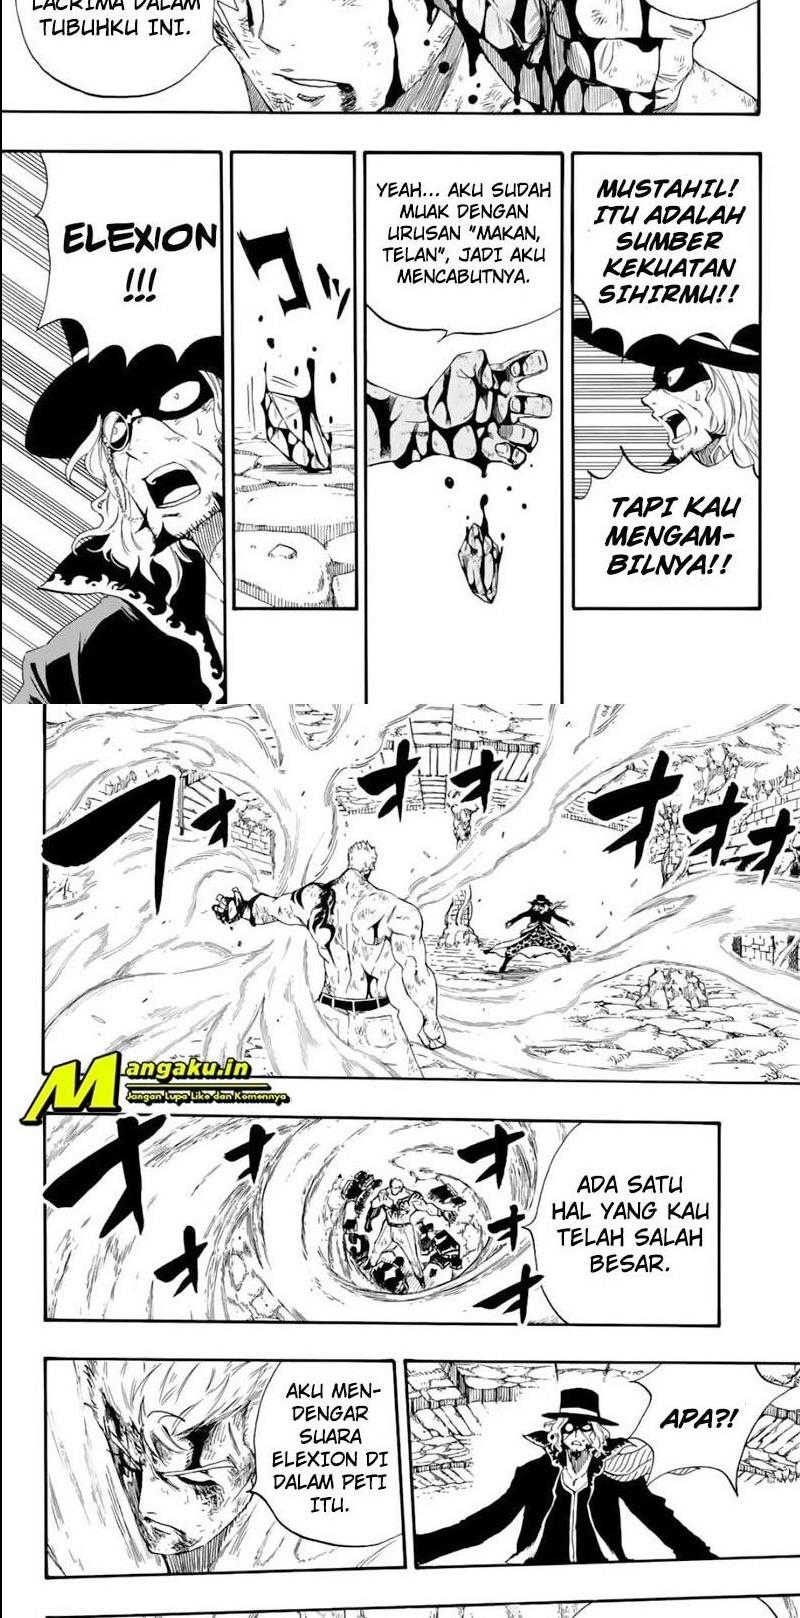 Fairy Tail: 100 Years Quest Chapter 110